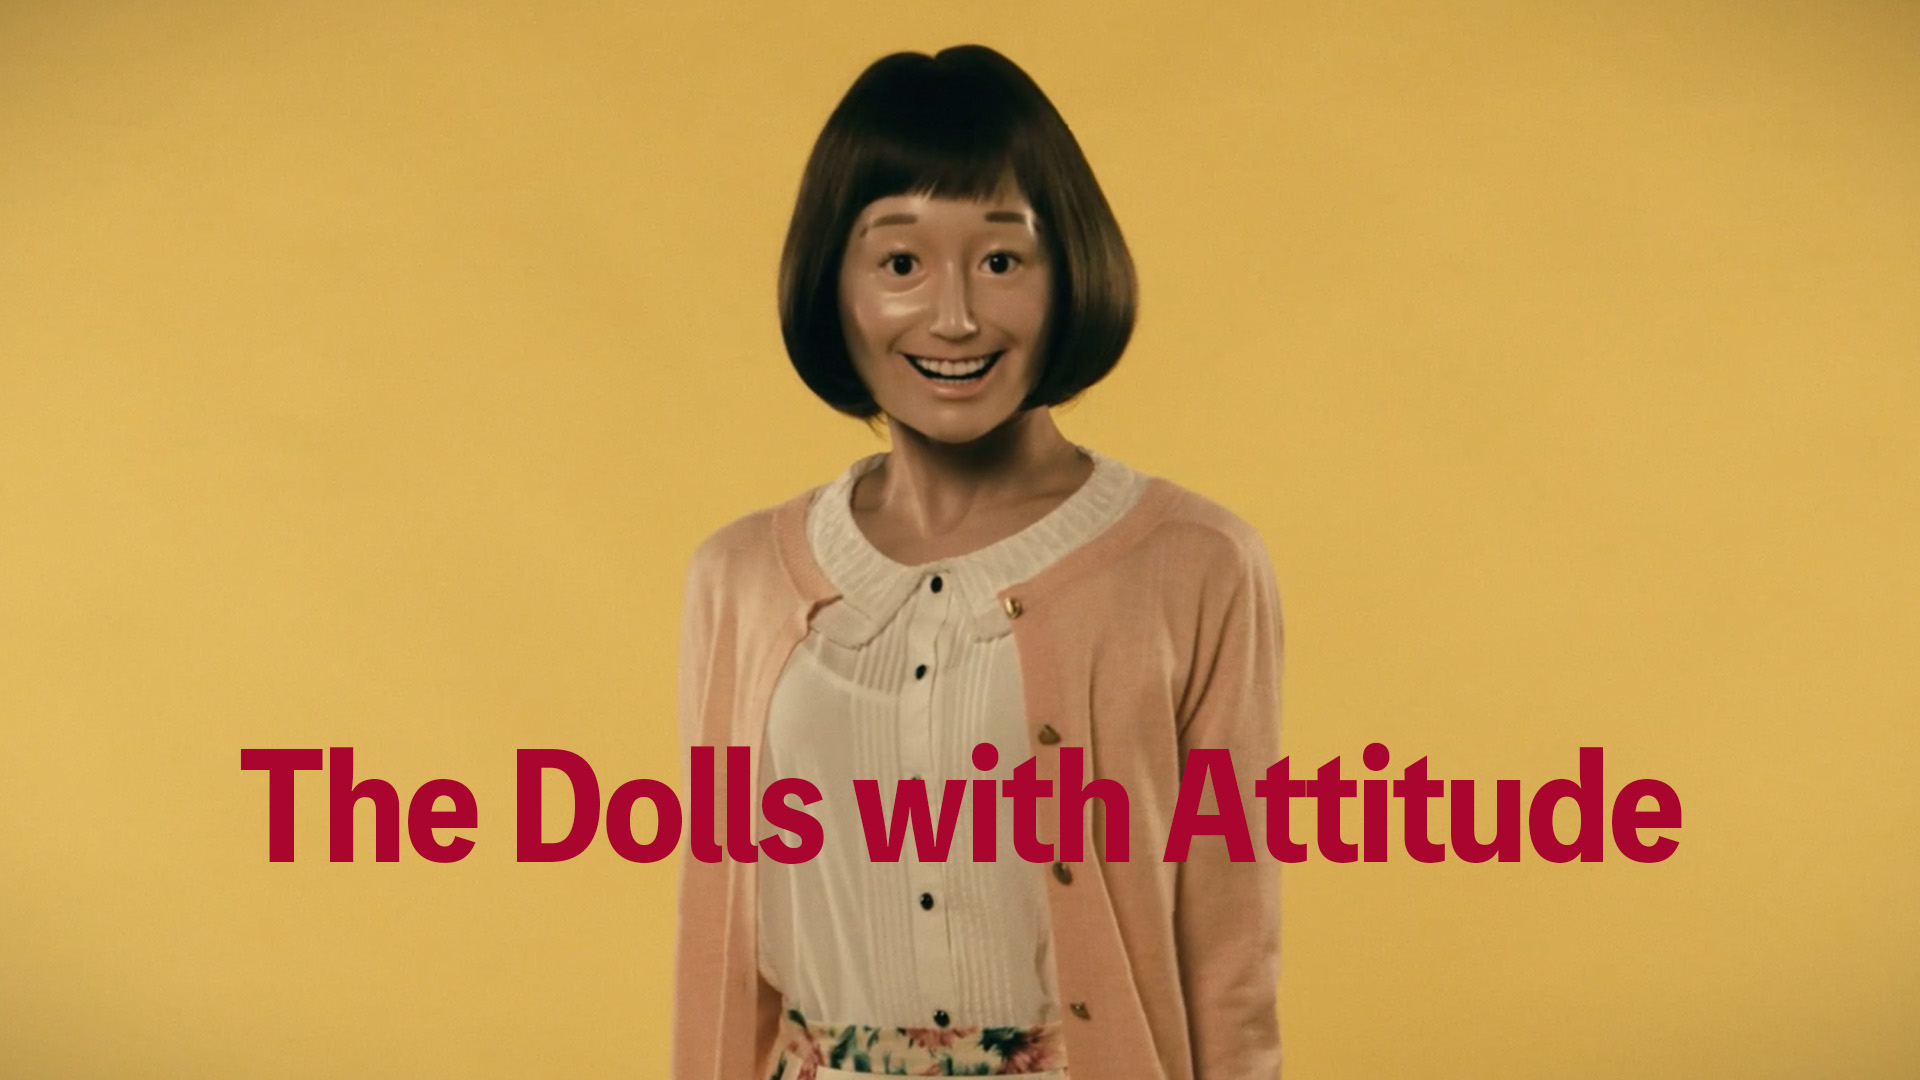 The Dolls with Attitude